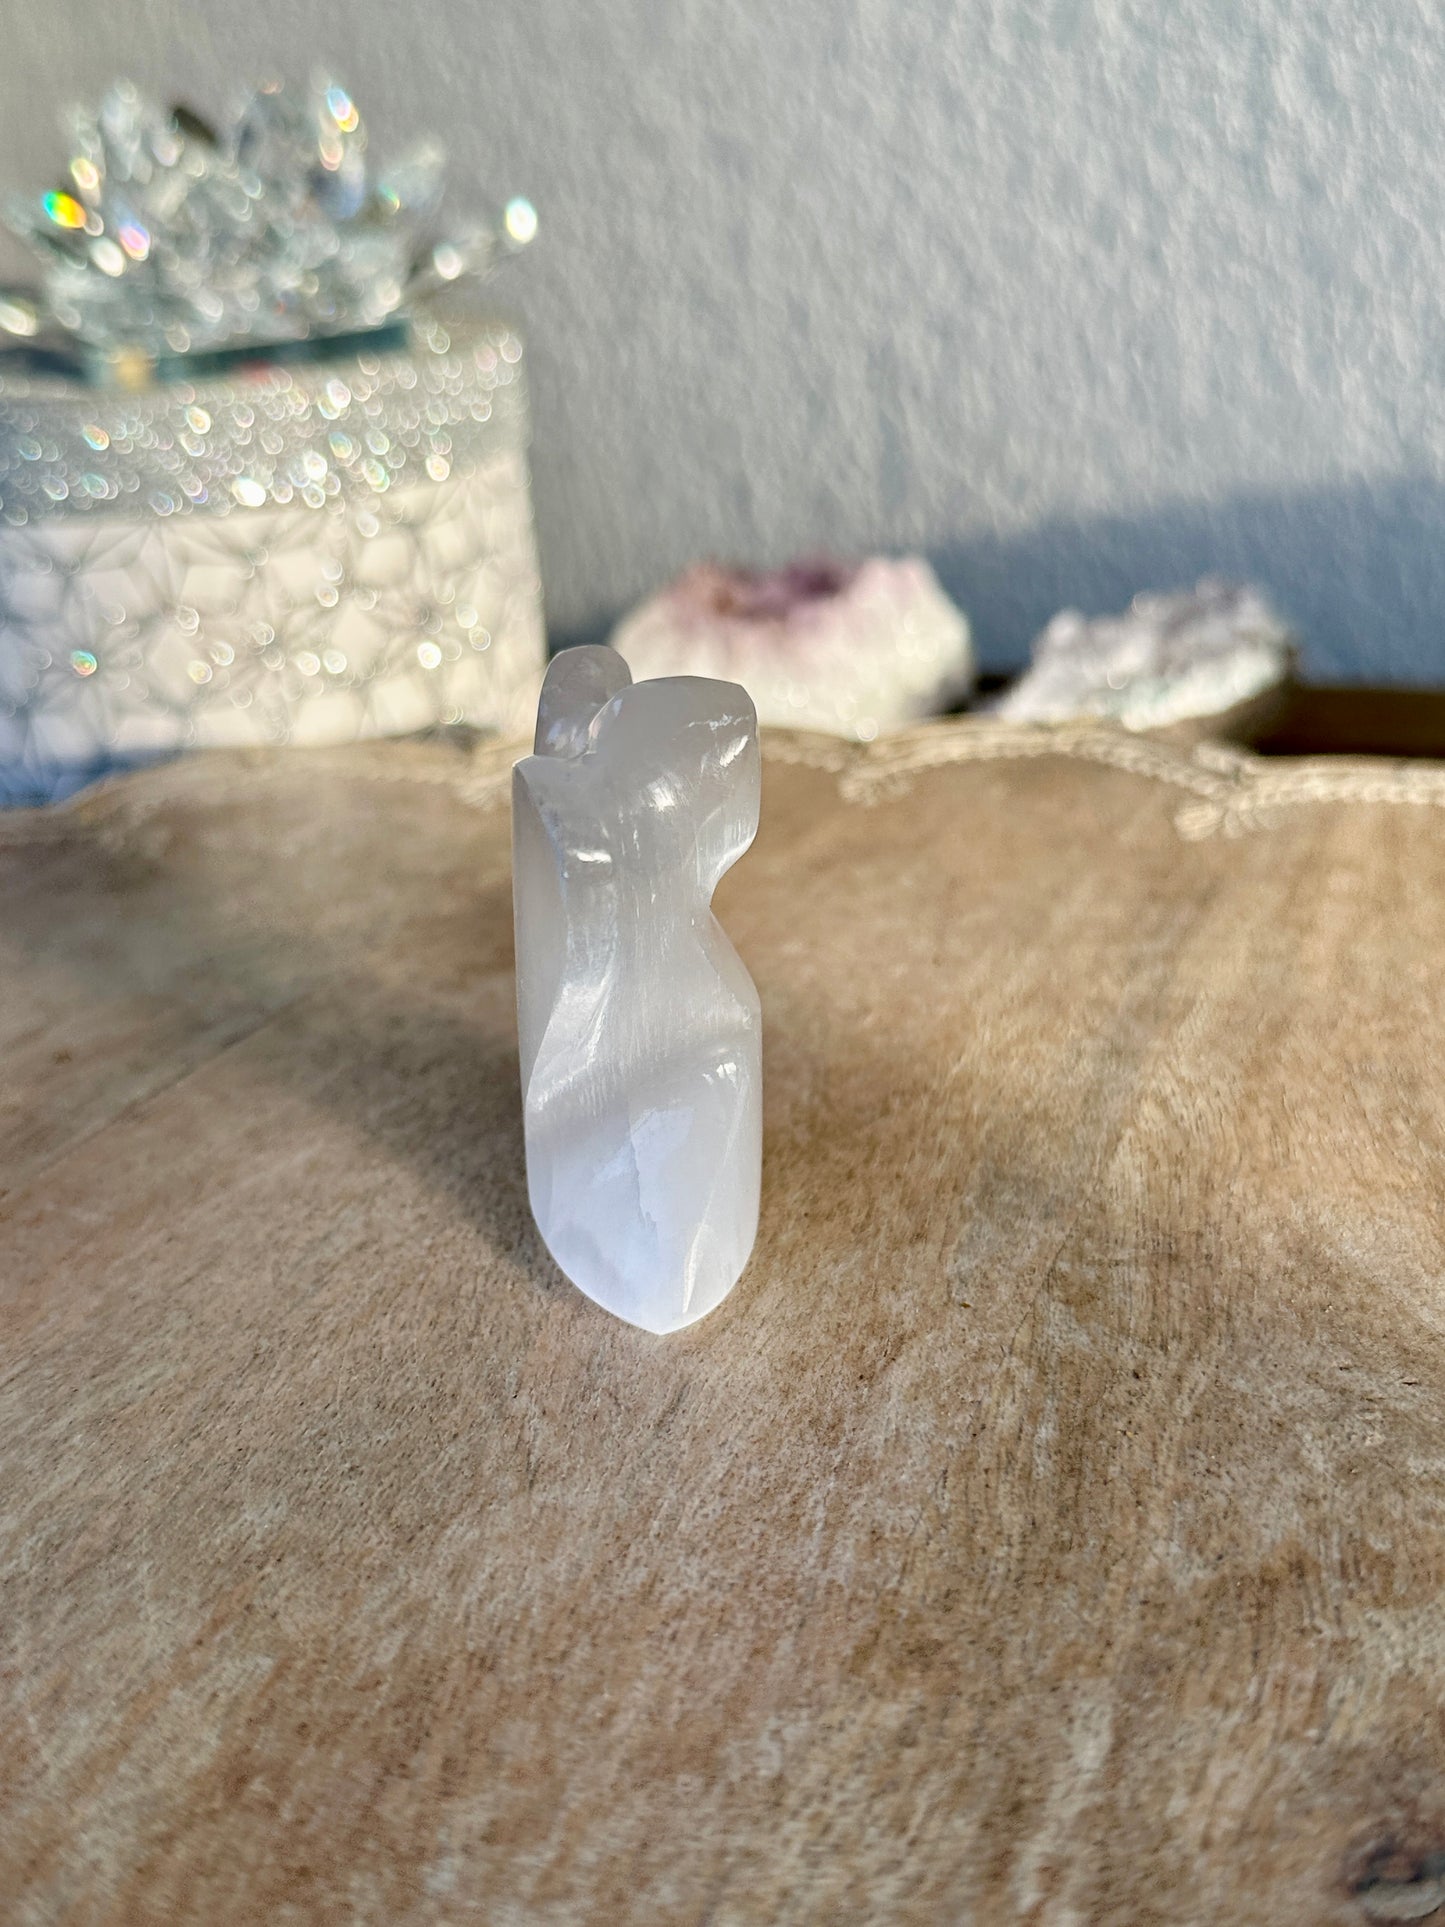 Angel Selenite Carving: Divine Handcrafted Gemstone Figurine for Spiritual Healing and Peaceful Home Decor, Ideal for Meditation Spaces